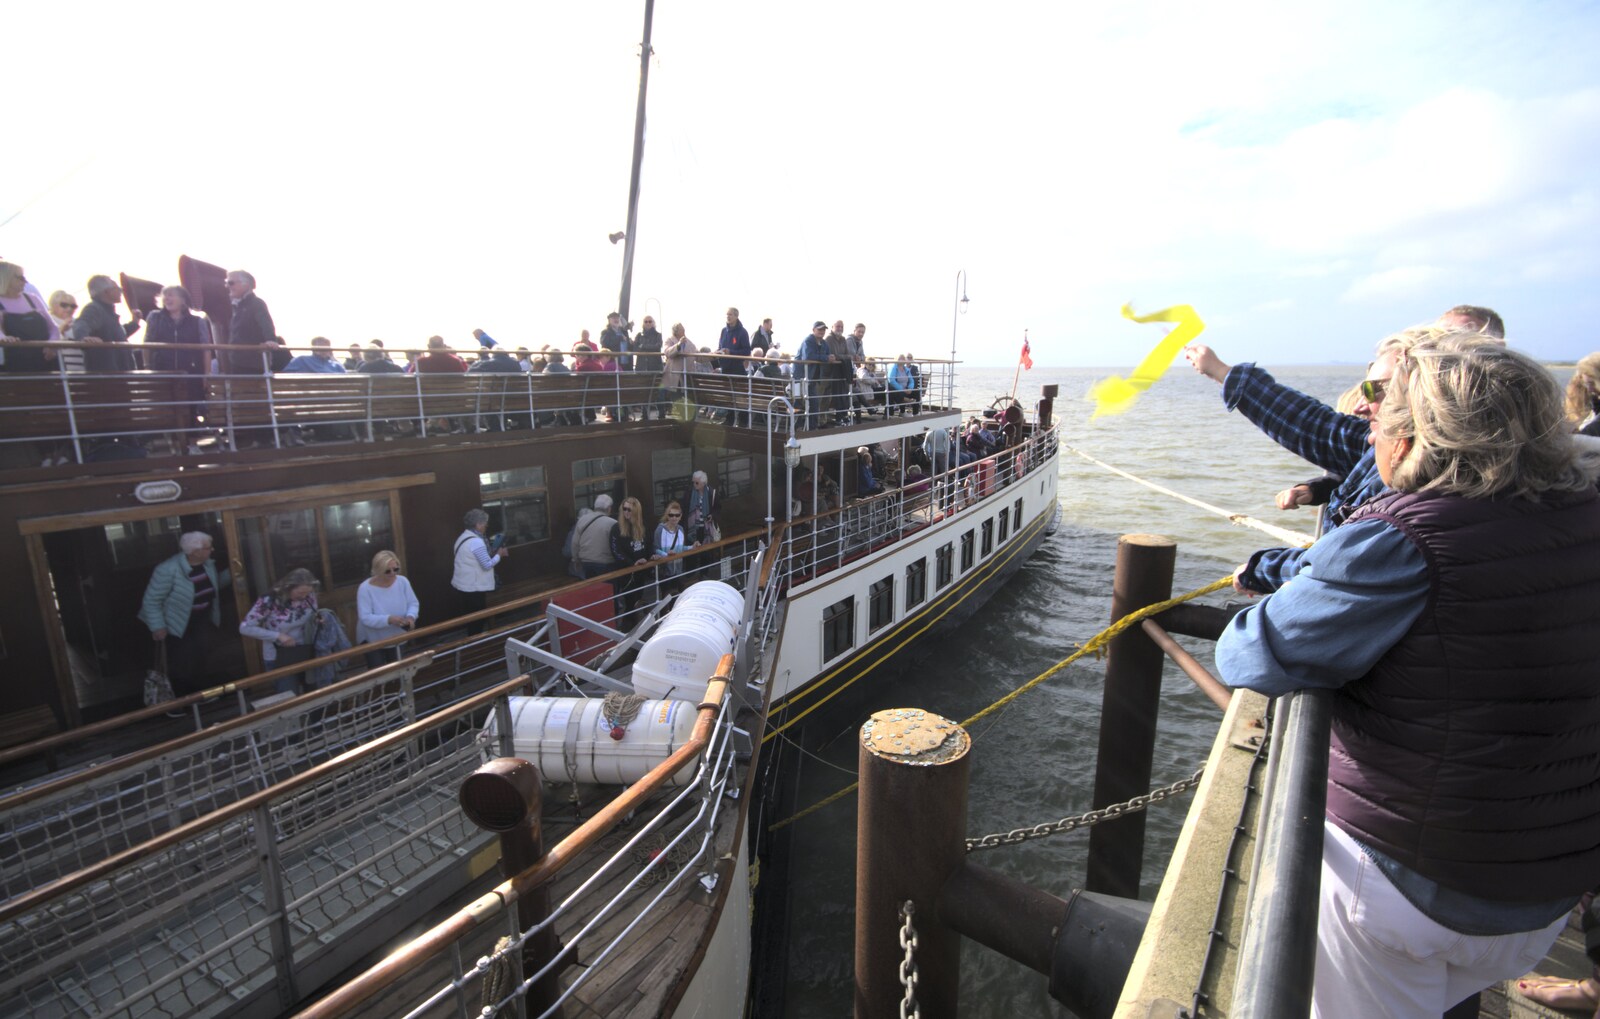 Someone waves a yellow streamer from The Waverley Paddle Steamer at Southwold Pier, Suffolk - 27th September 2023